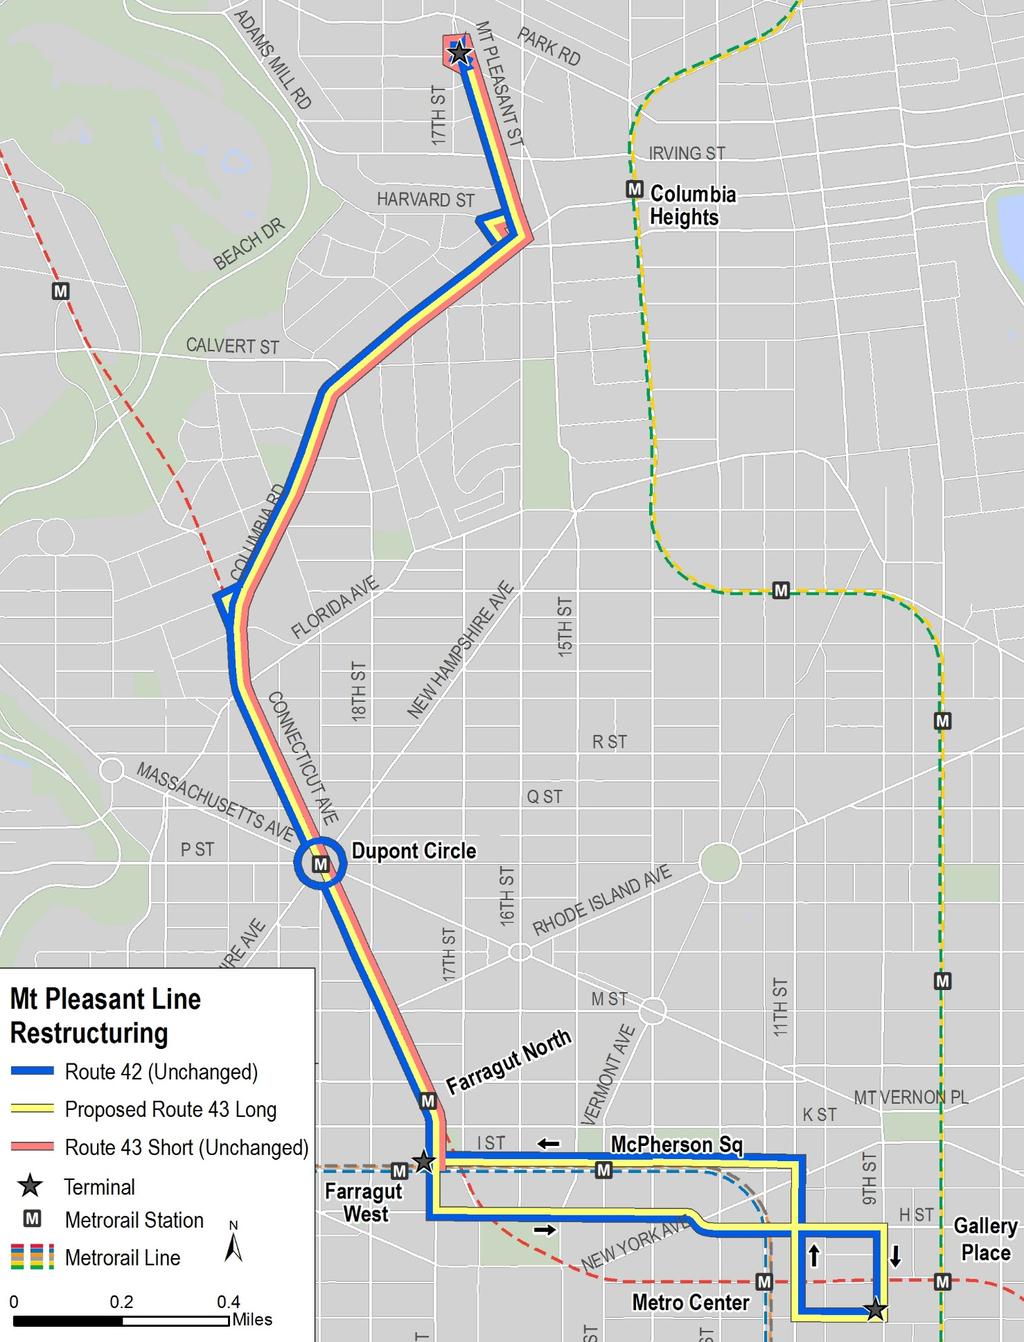 Mount Pleasant Line Proposal Refinement After analyzing results from the April/May Proposal Survey, WMATA devised this proposal package.